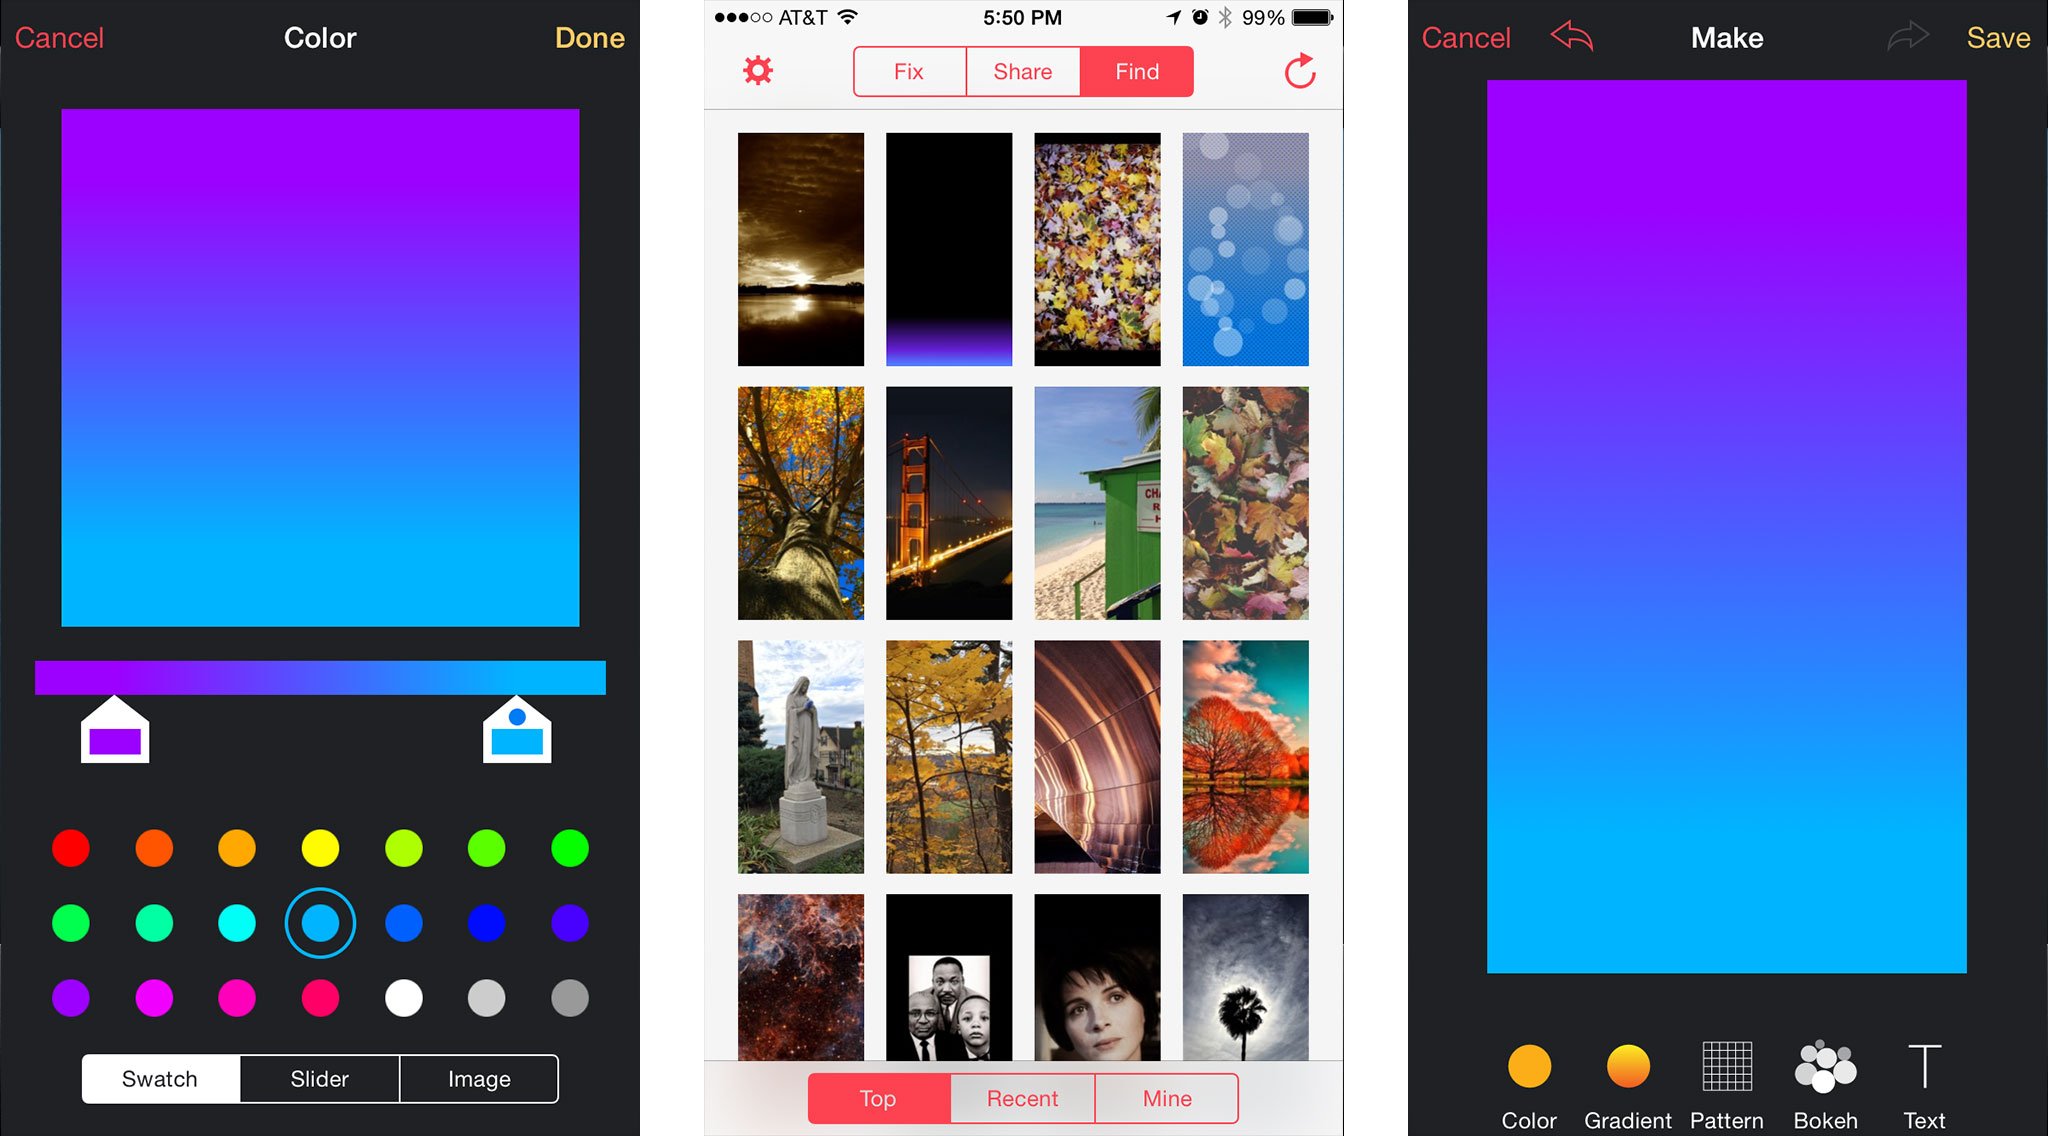 Best wallpaper apps for iPhone 6 and